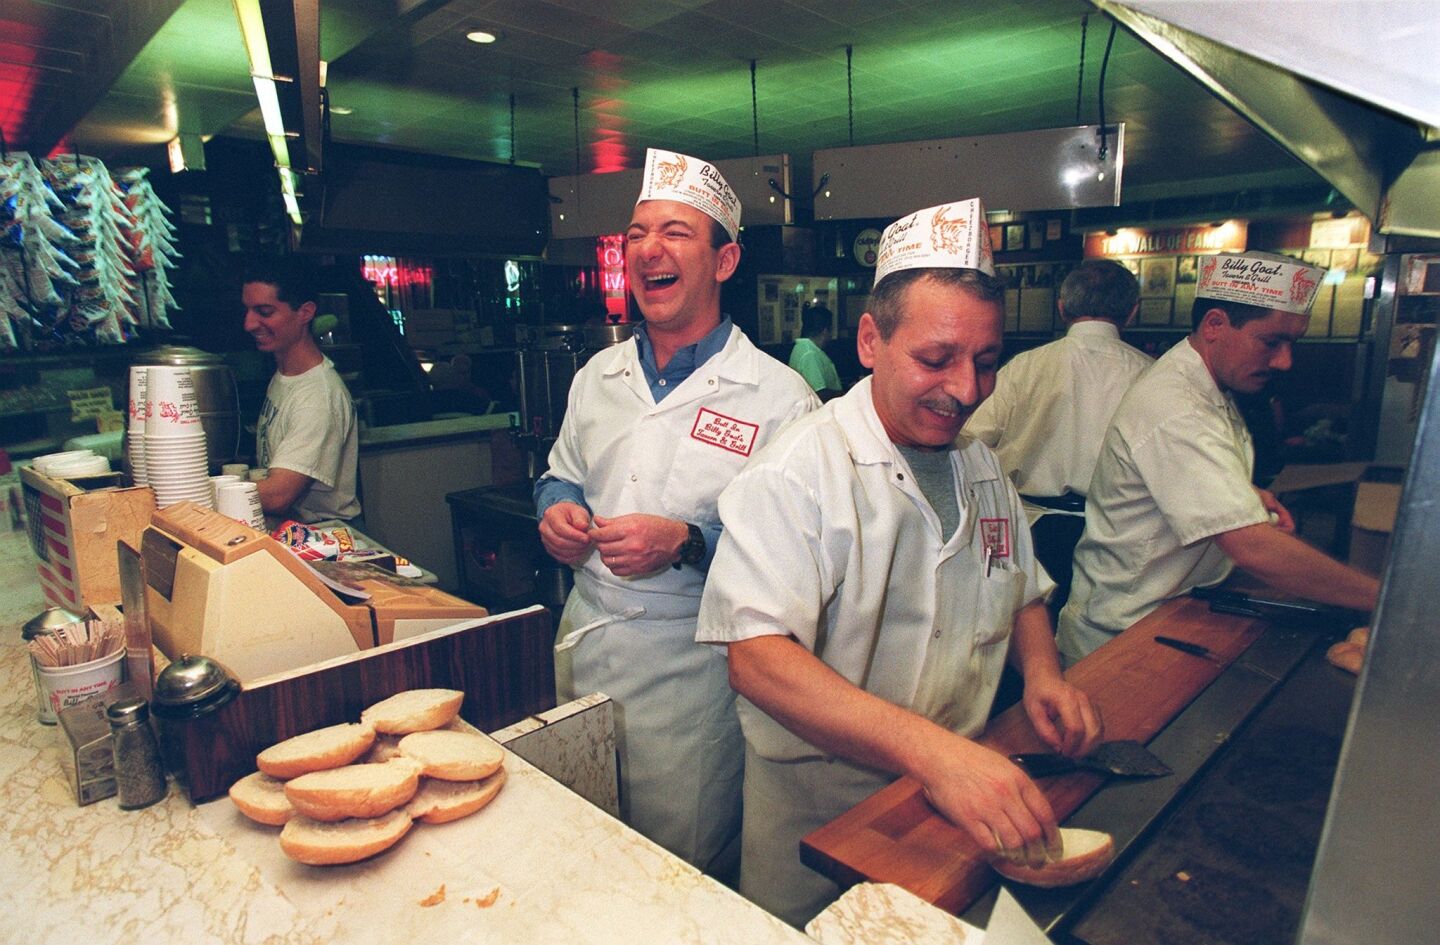 Jeff Bezos, founder and CEO of Amazon.com, left, jokes with customers while at the The Billy Goat in Chicago in December 2001. At the grill are Billy Goat employees Spiros Sarivicile, front, and Ramon Gobinic.